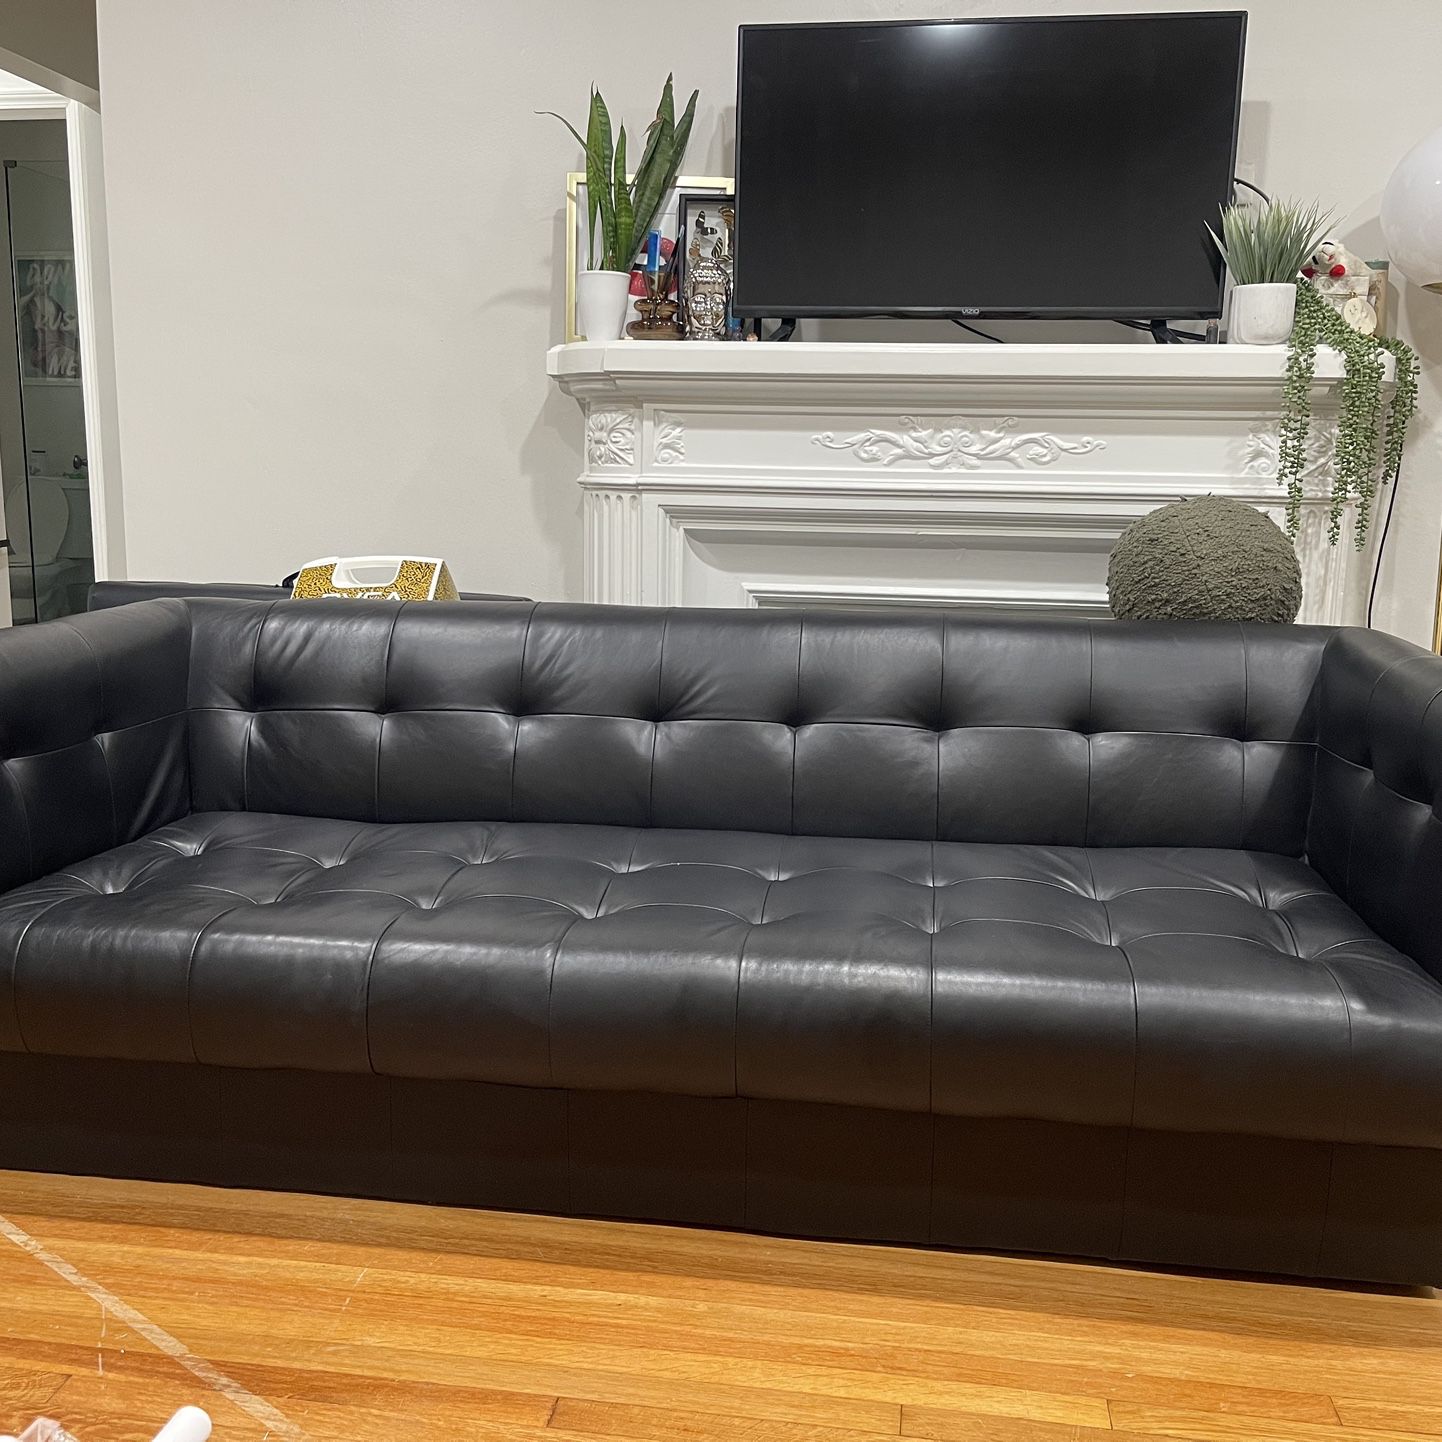 gorgeous black leather couch